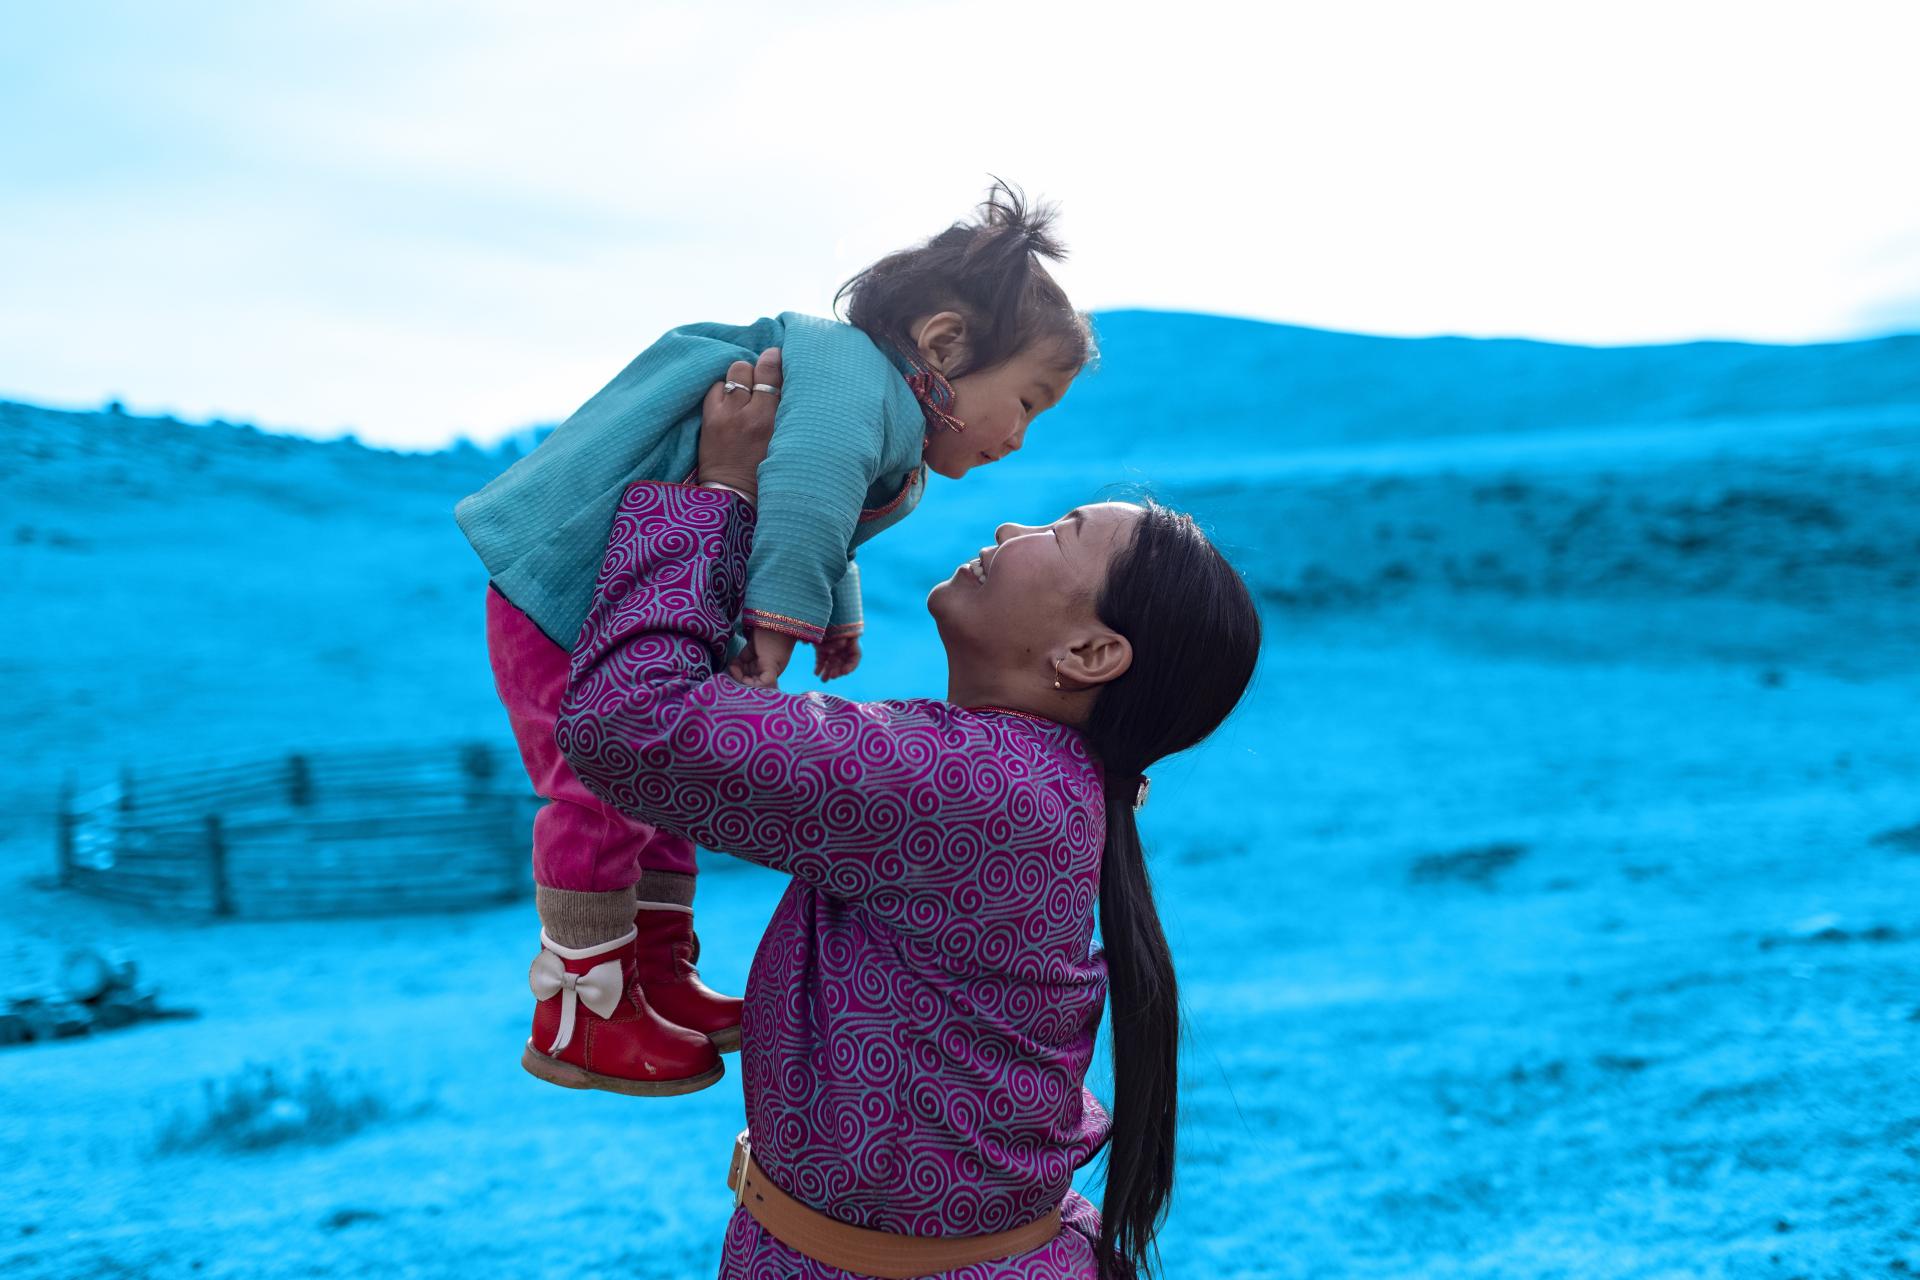 Smiling woman lifting a child in a steppe landscape (decorative for UN Partner Portal article)